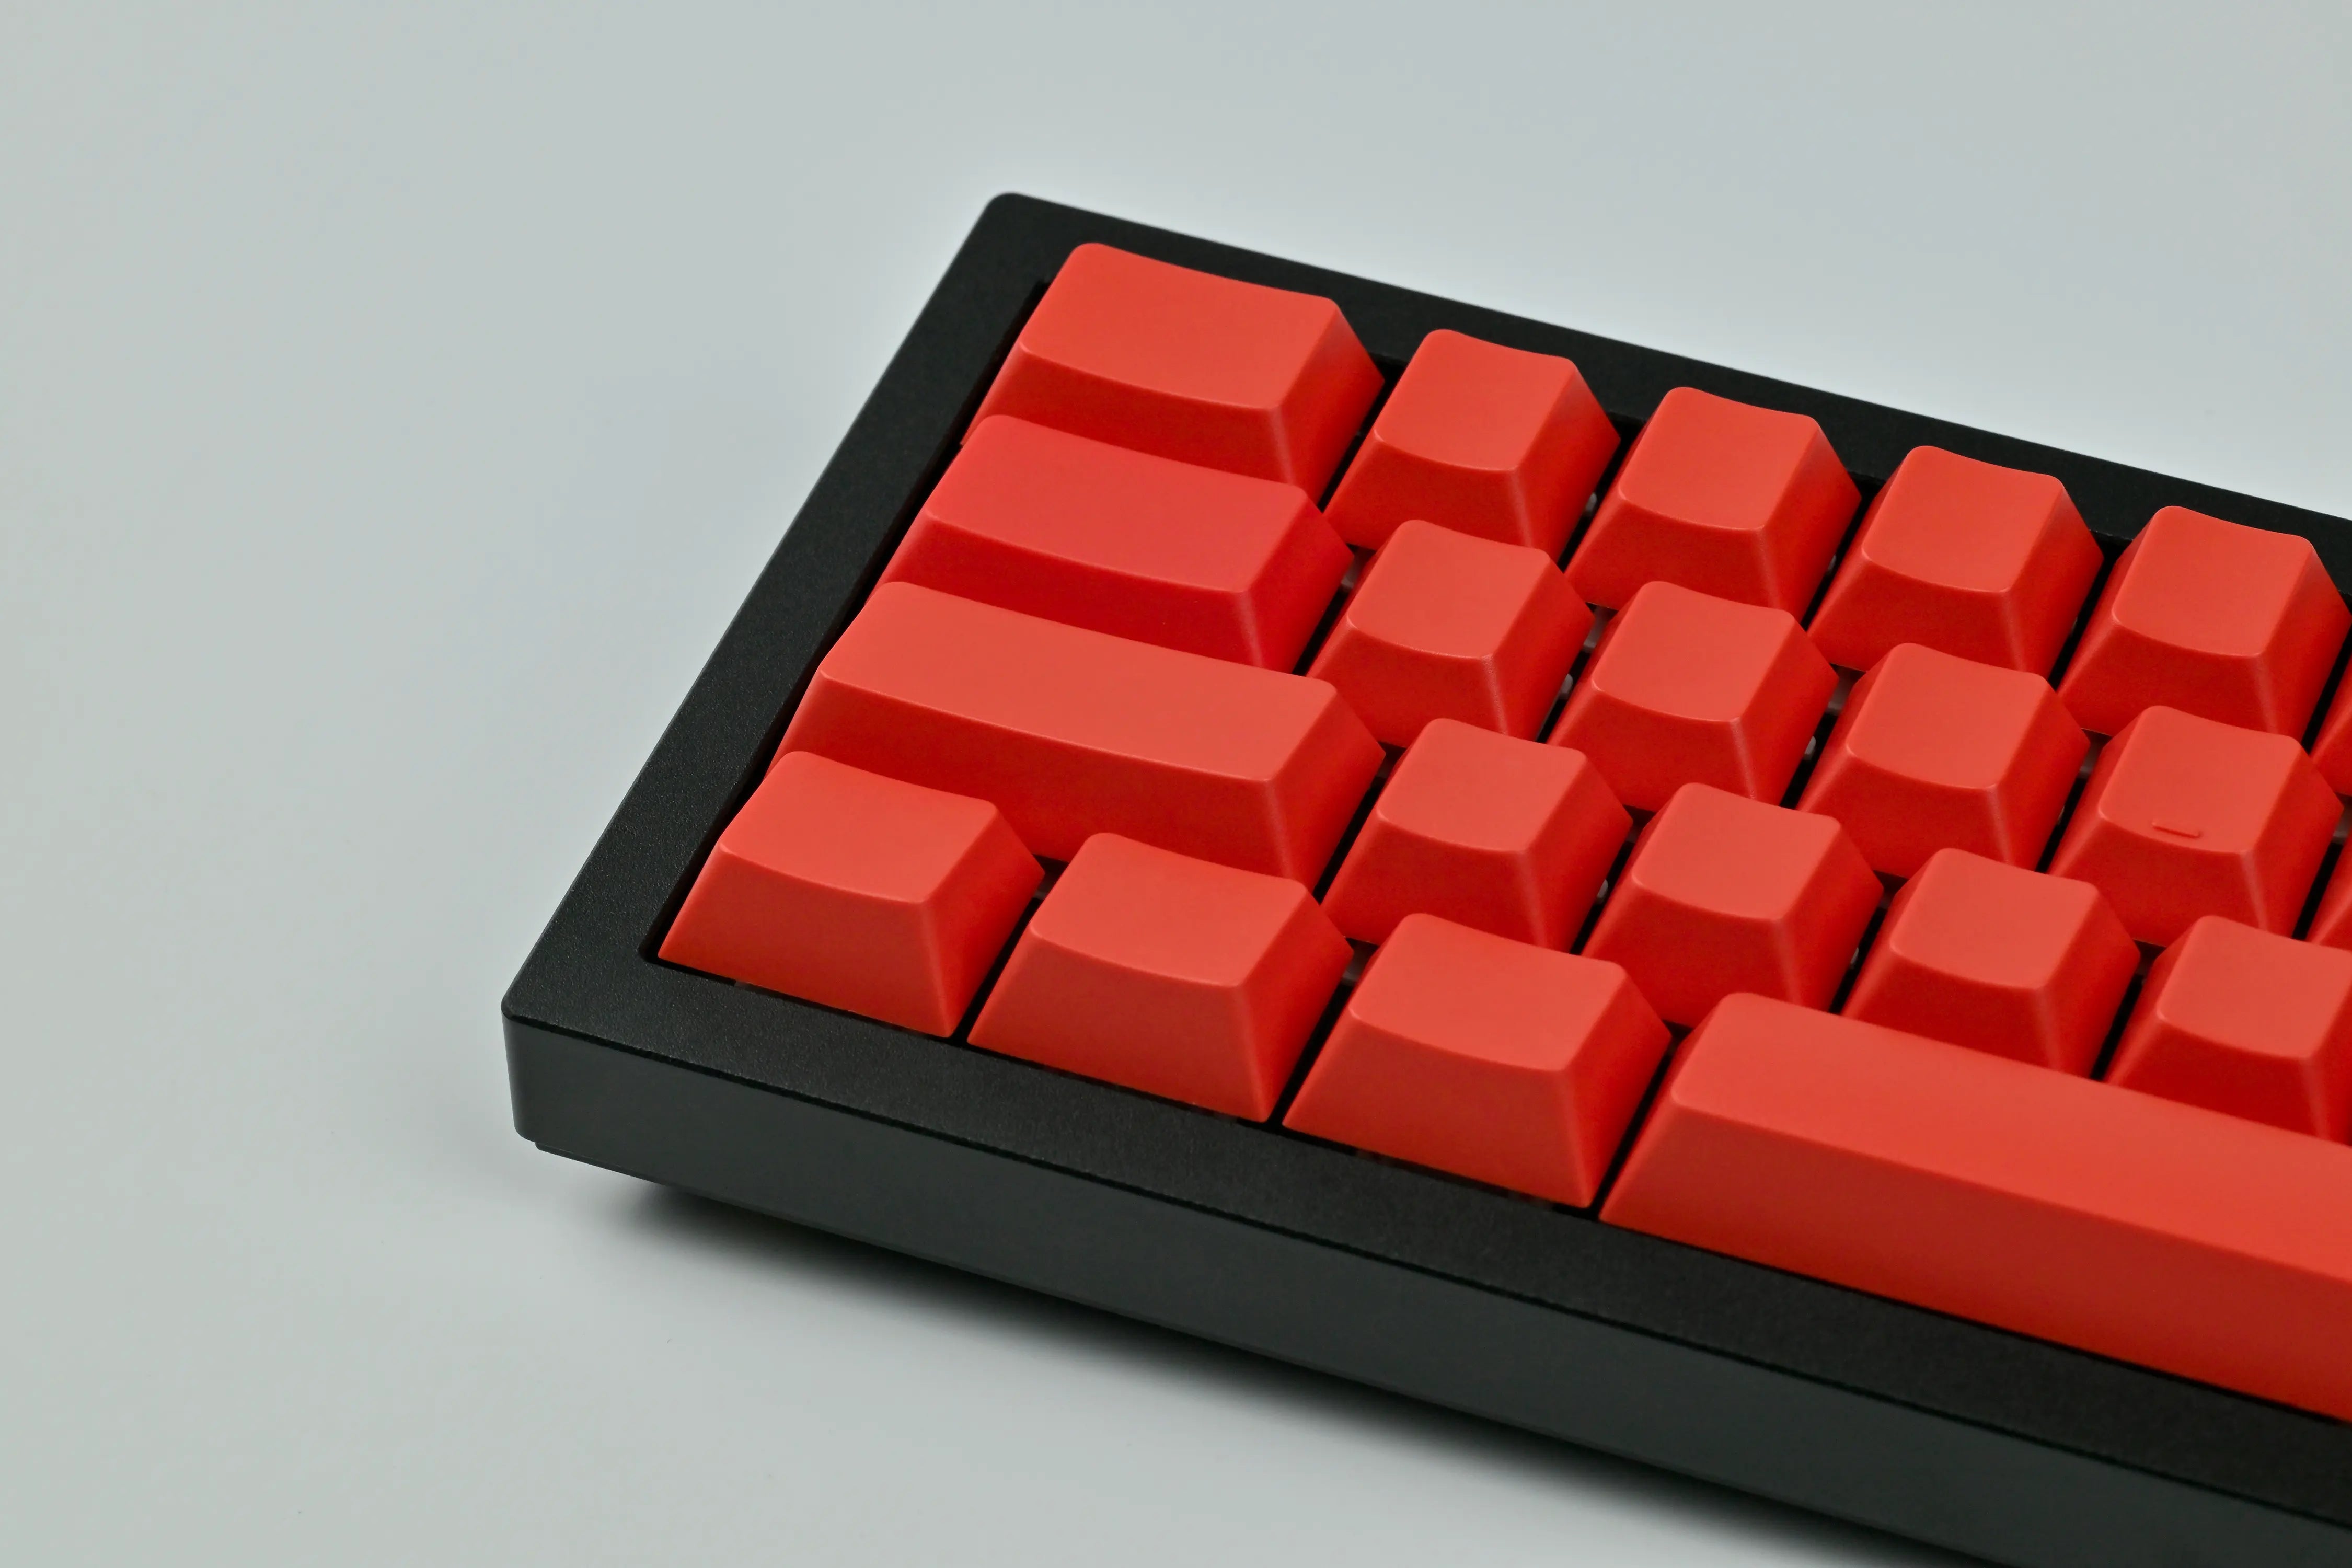 Keyreative ABS Cherry Profile Red Blank Keycaps